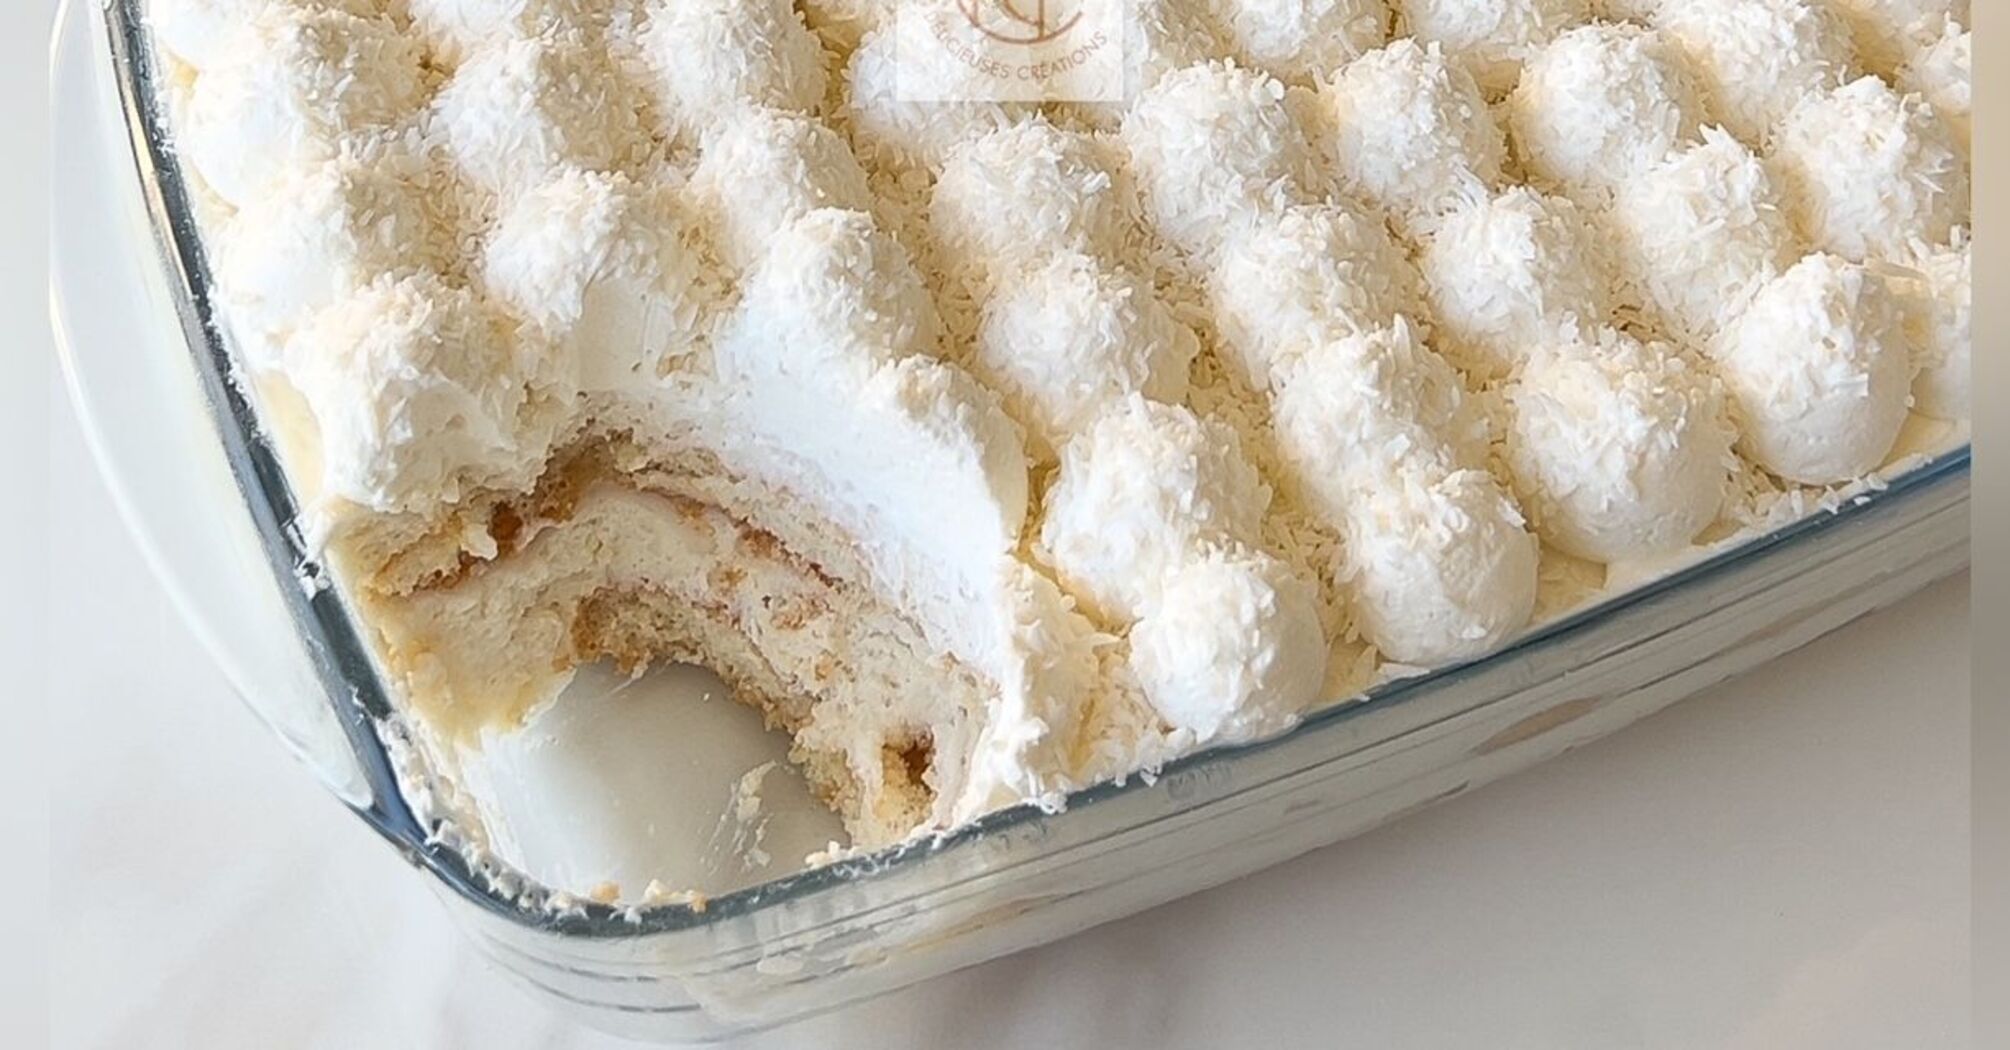 Tiramisu in a new way: what to add to make the dessert even more delicious